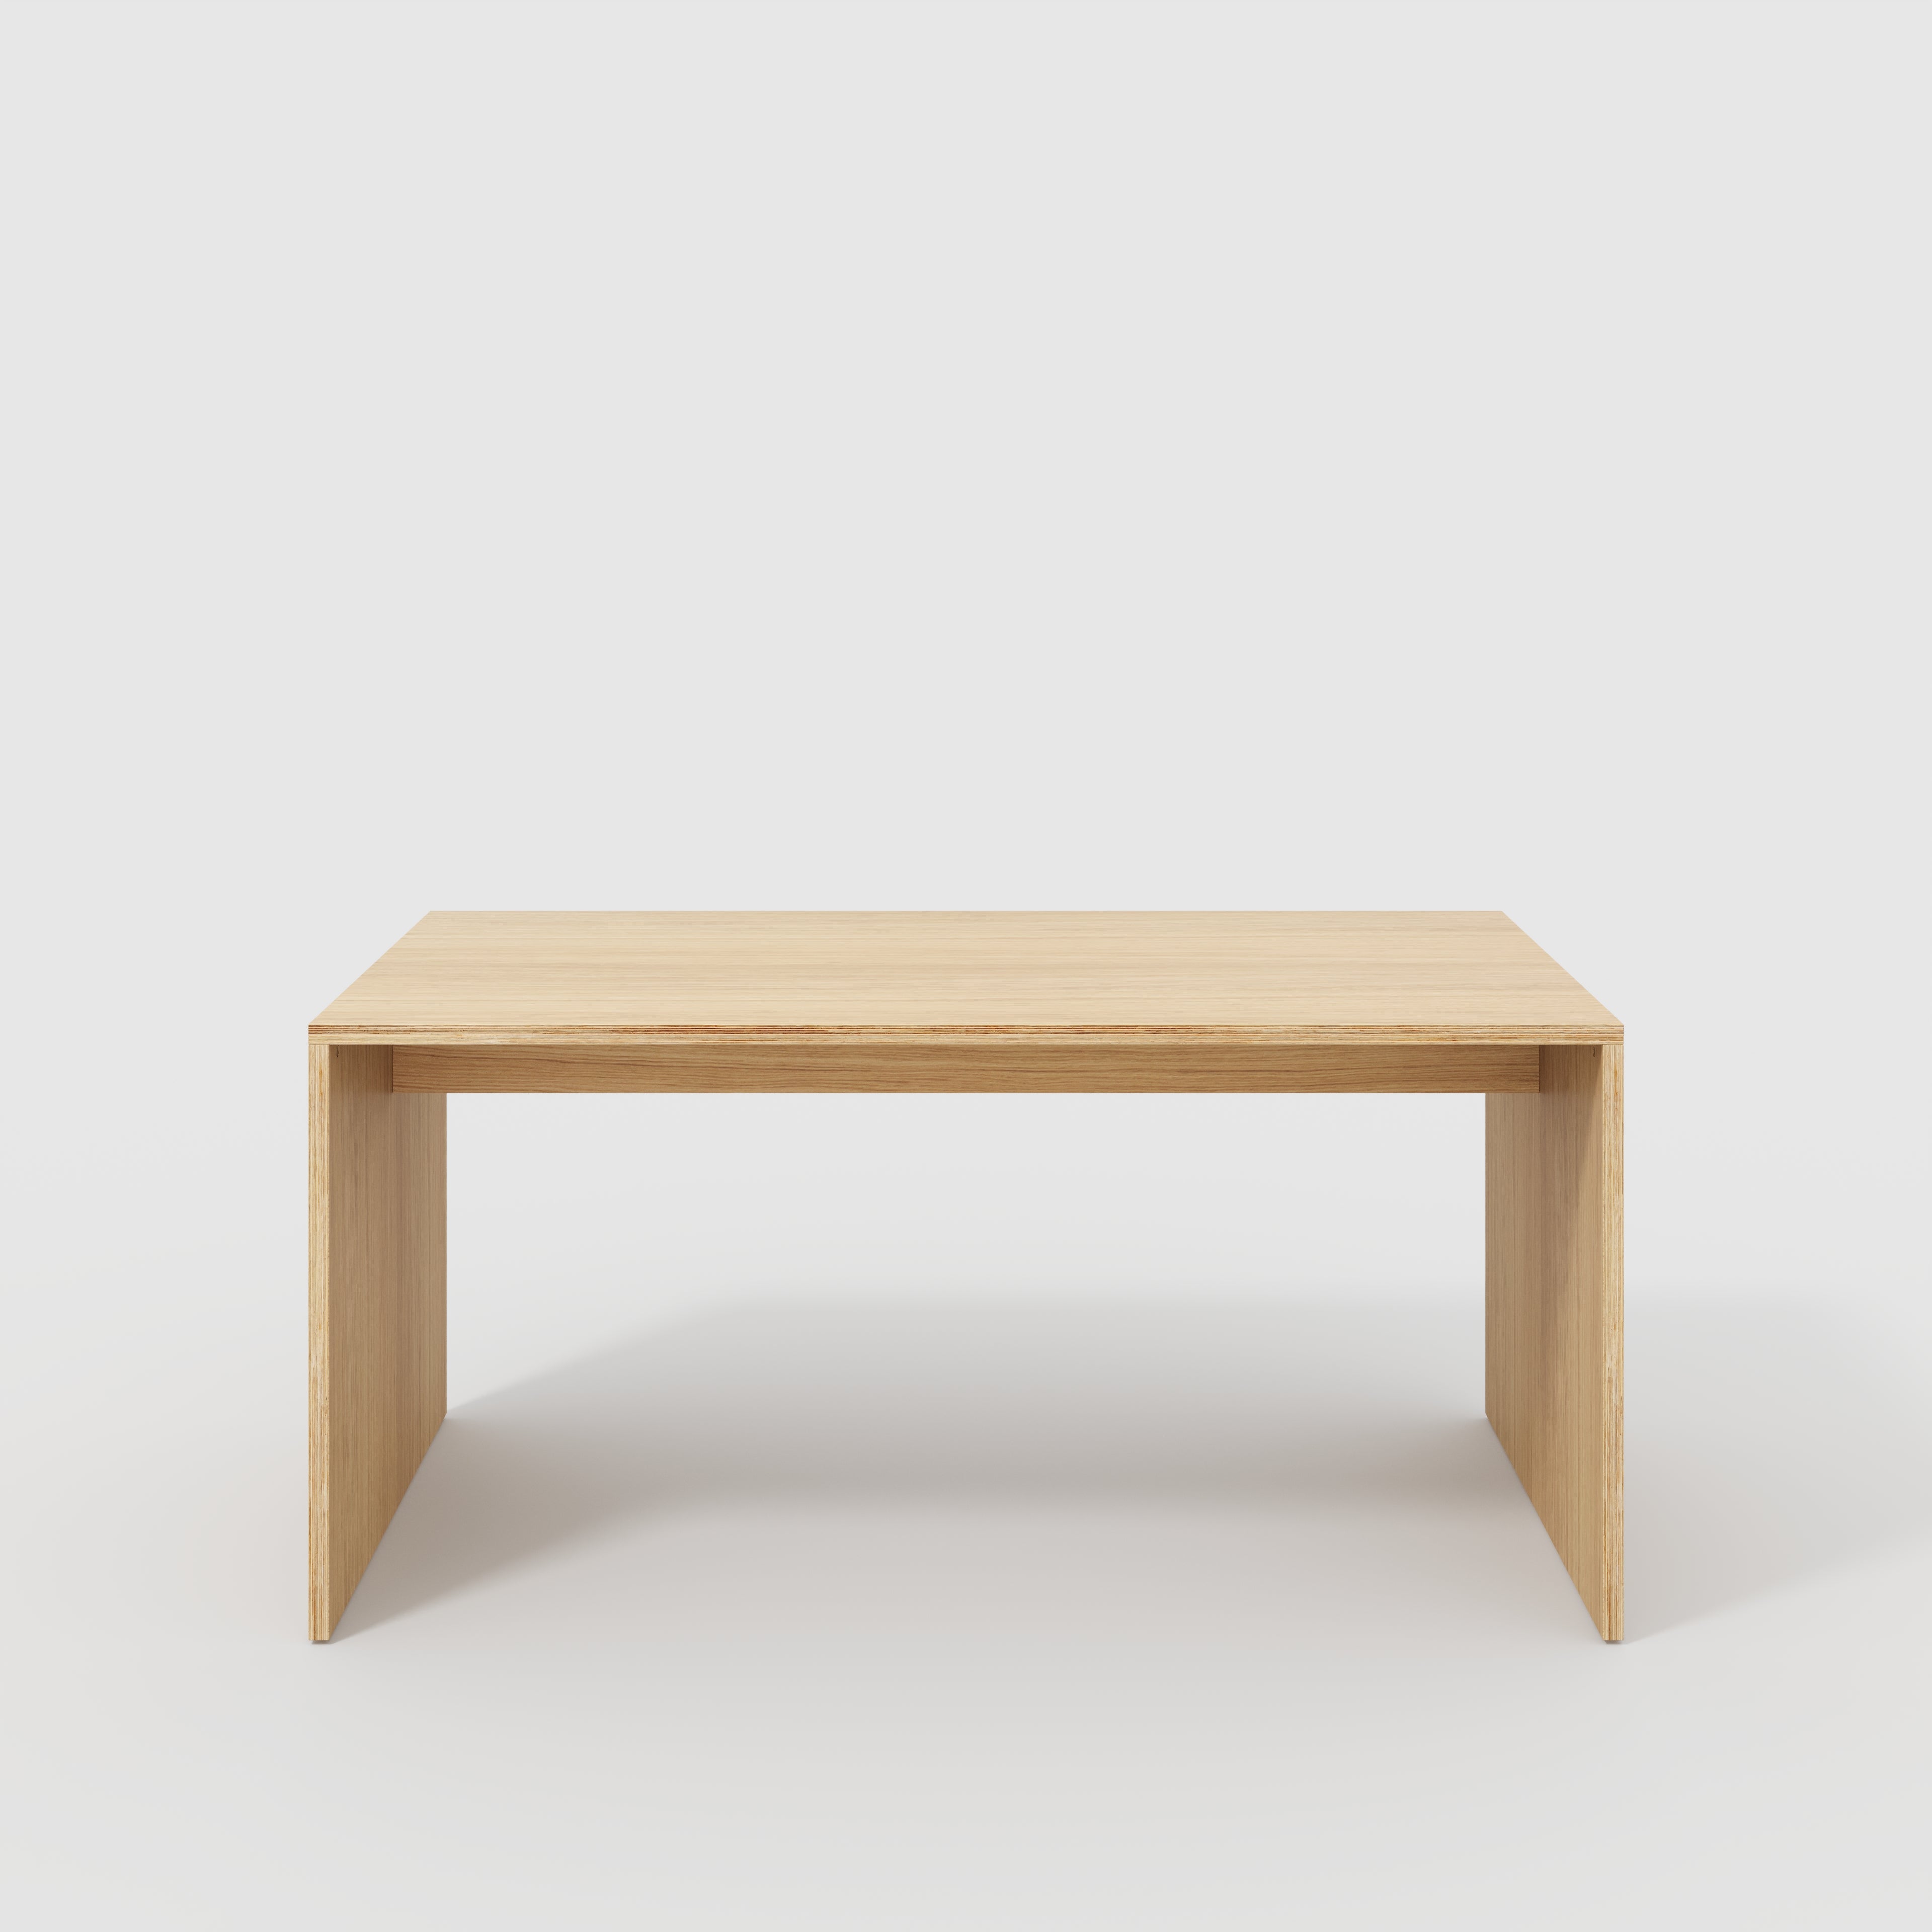 Table with Solid Sides - Plywood Oak - 1600(w) x 800(d) x 750(h)